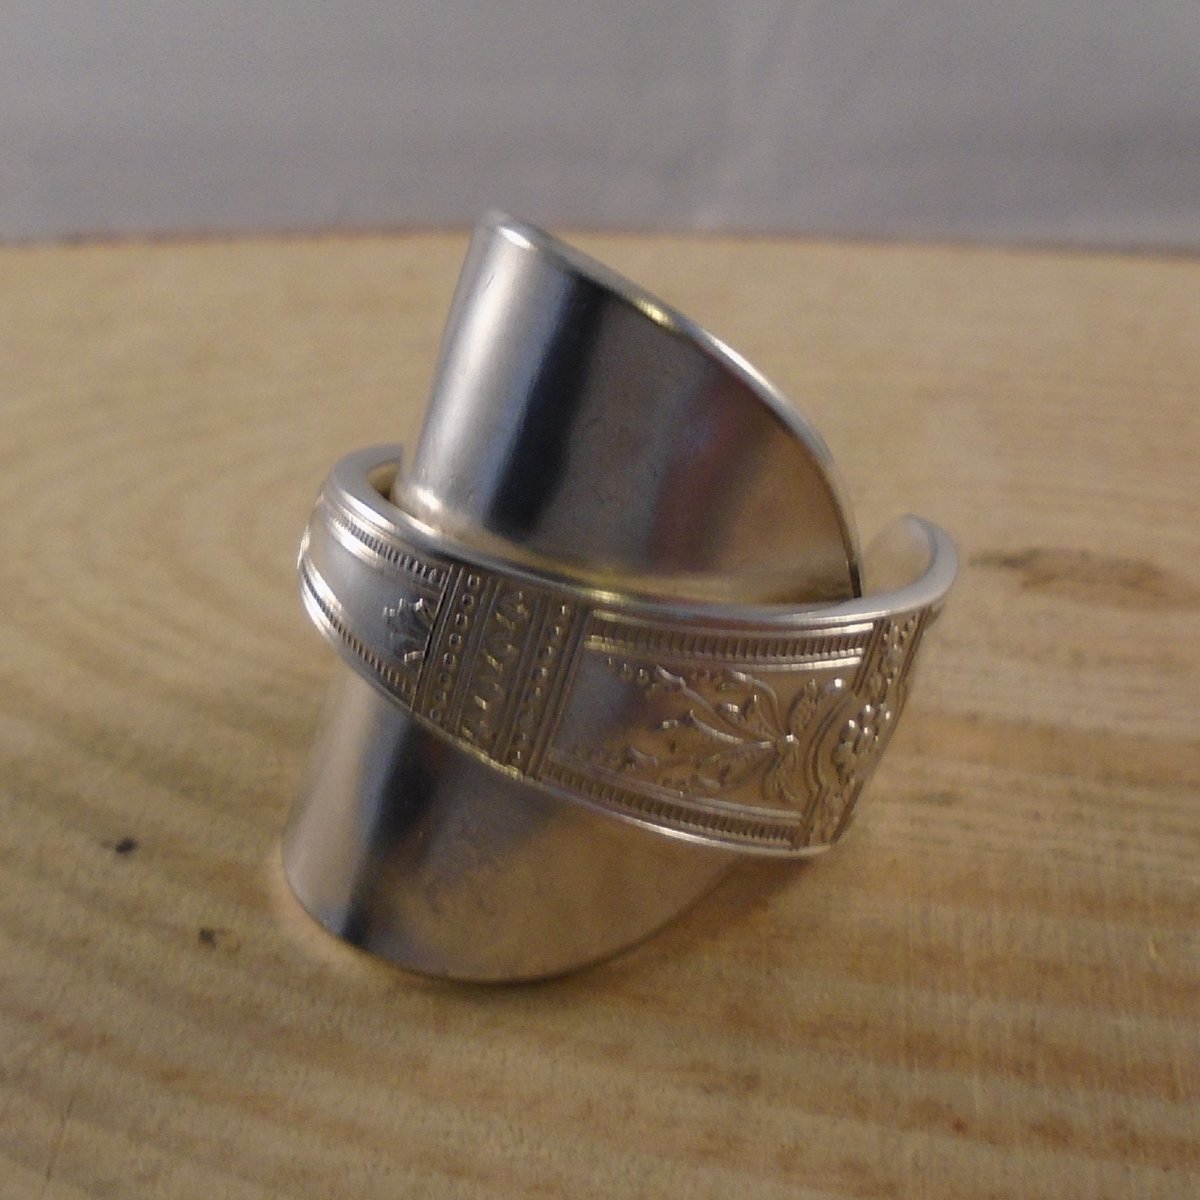 New spoon ring in my #etsy shop: Upcycled Silver Plated Flower Wrap Spoon Ring, Statement Ring etsy.me/3CwYFsU #upcycled #recycled #obbutterfly #handmade #handmadejewellery #spoonring #spoonjewellery #statementring #recycledjewellery #recycledring